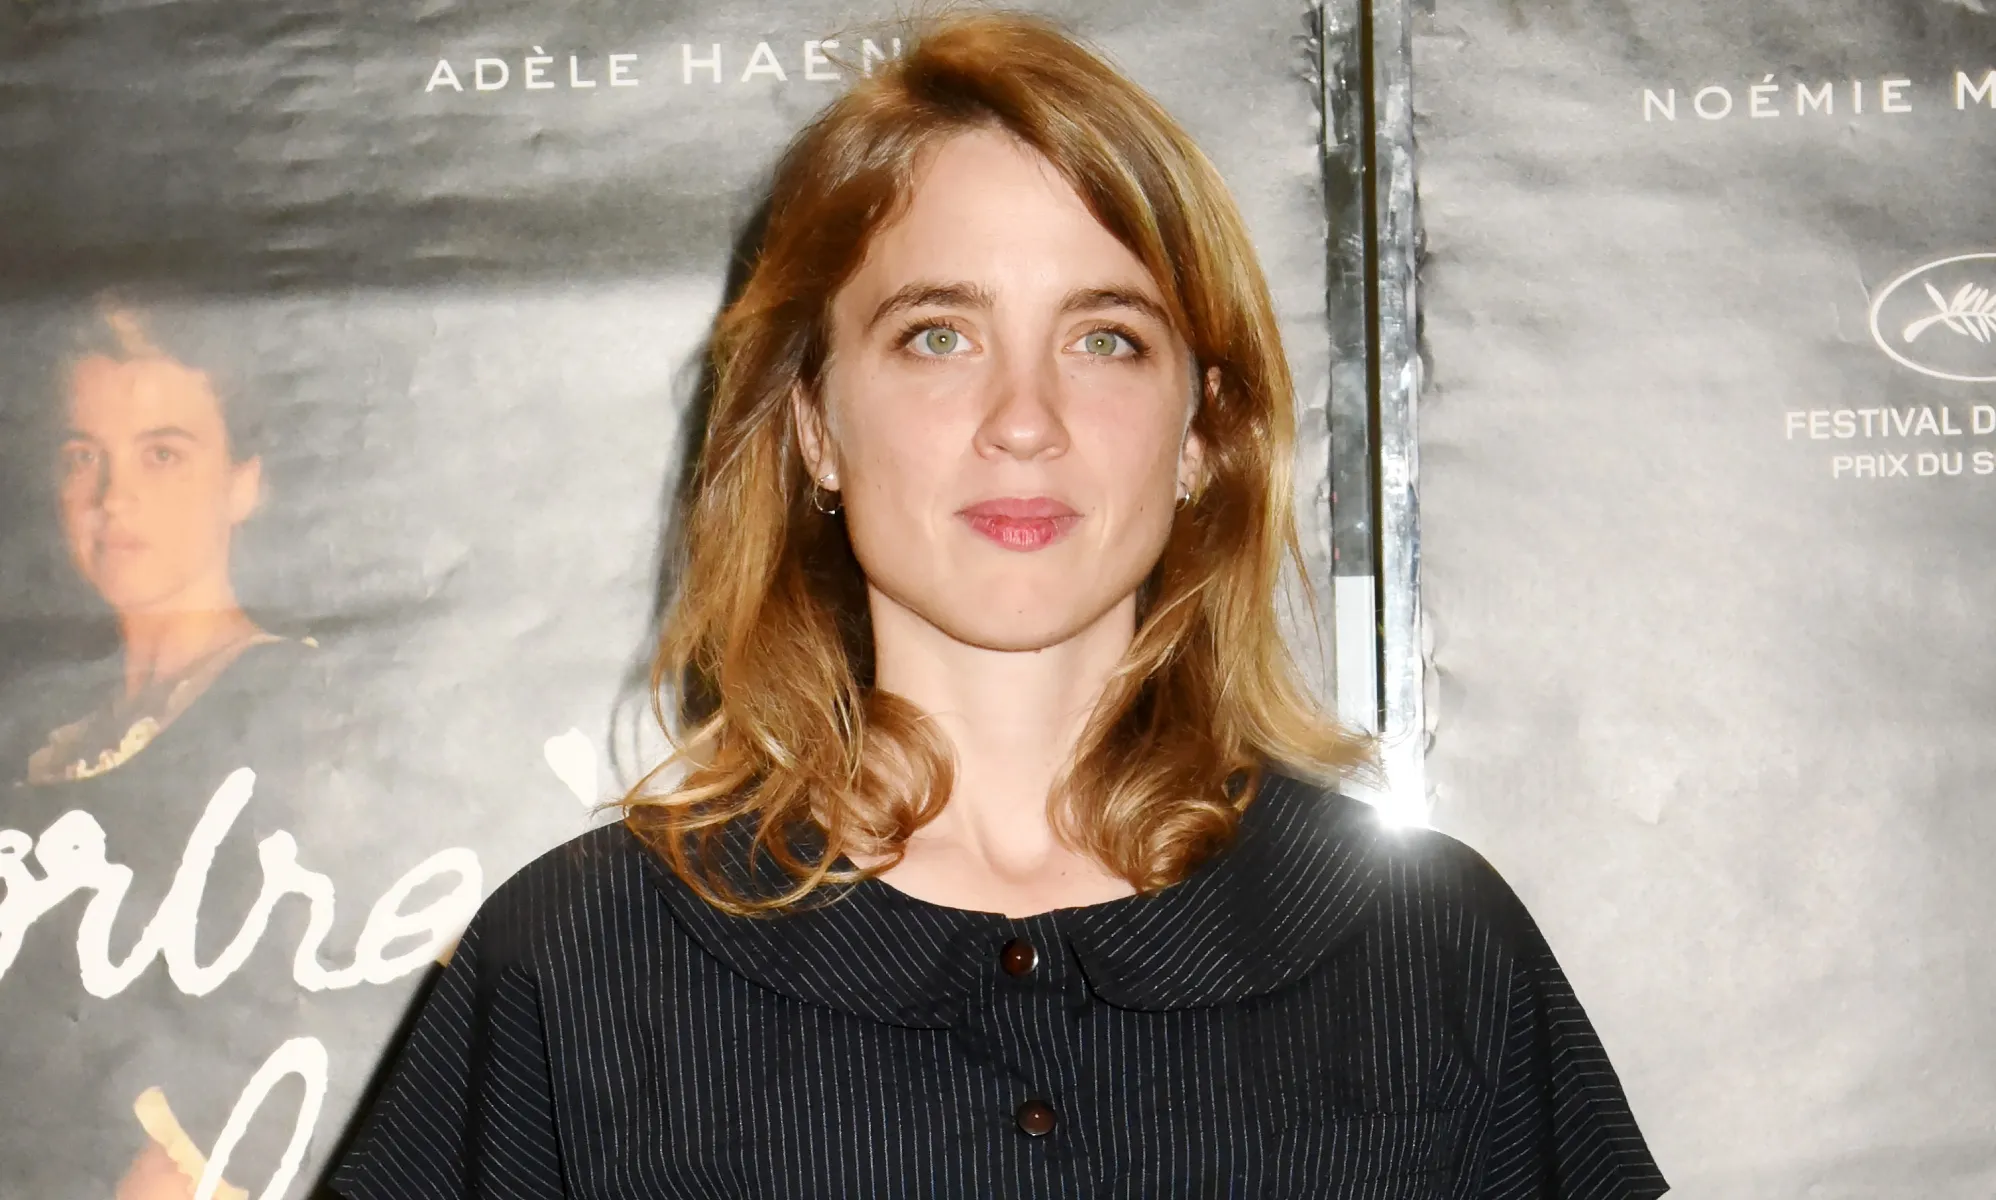 Adèle Haenel quits film industry in powerful #MeToo statement